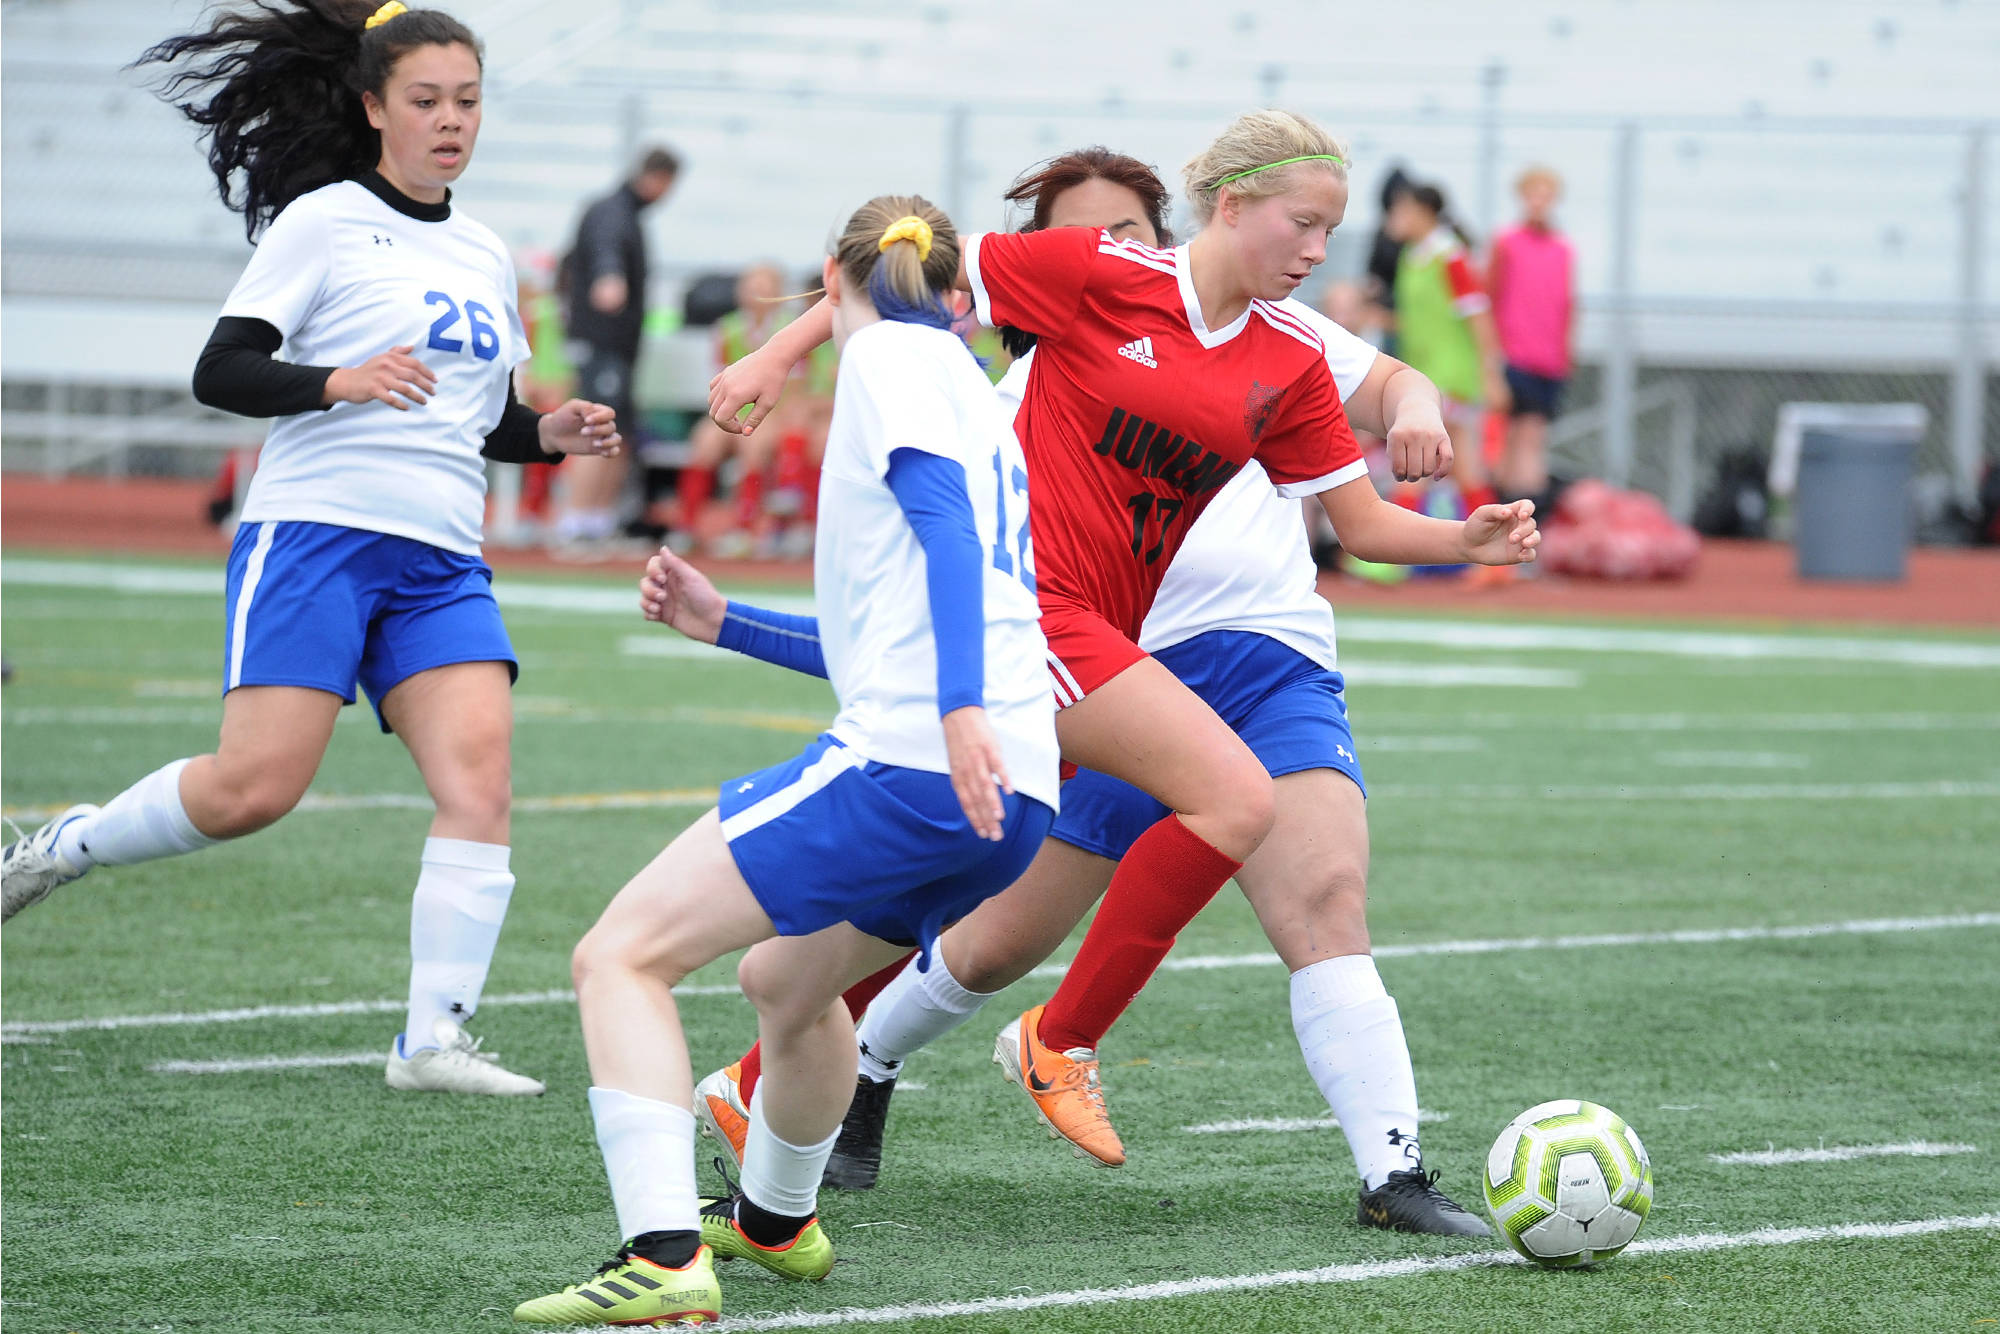 Girls soccer squads off to hot starts at state tournament